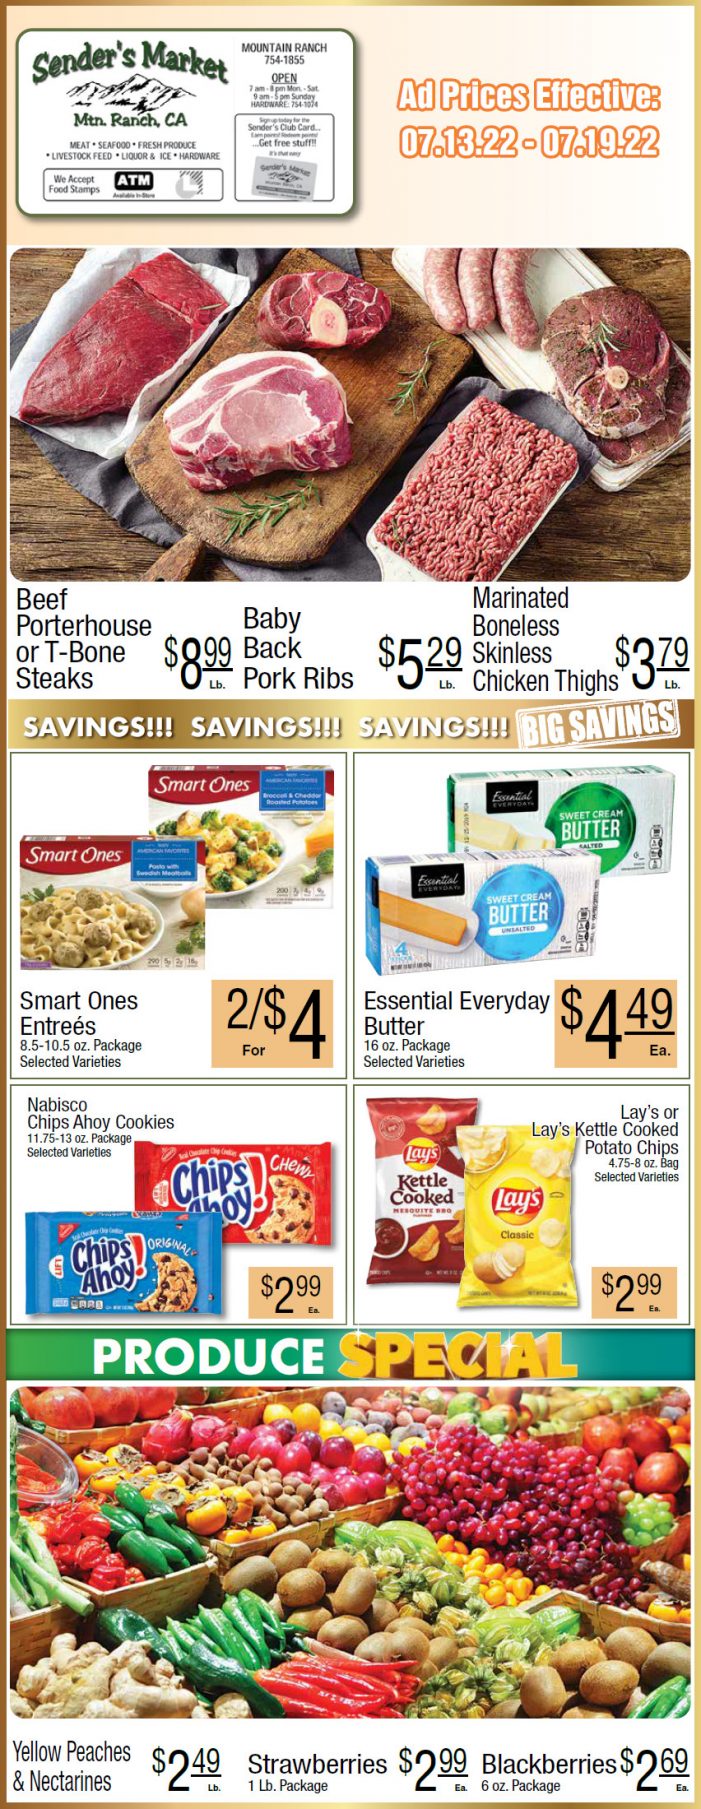 Sender’s Market Weekly Ad & Grocery Specials Through July 13 – 19th!  Shop Local & Save!